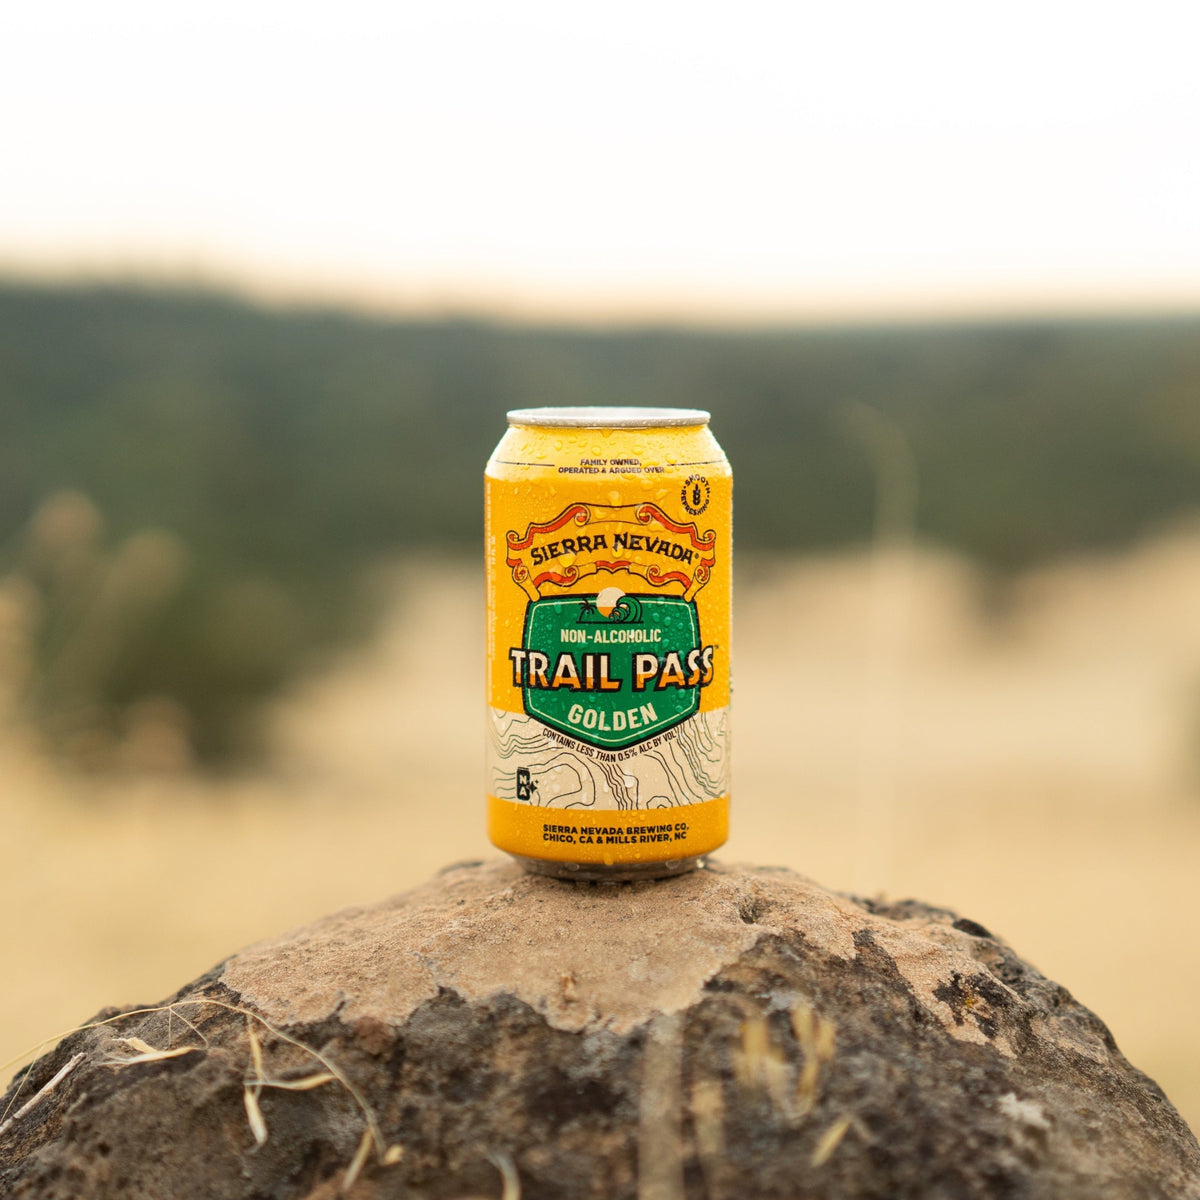 Sierra Nevada Brewing Co. Trail Pass Golden Non-Alcoholic Brew - A cold can of Trail Pass Golden sits on top of a rounded stone overlooking a field